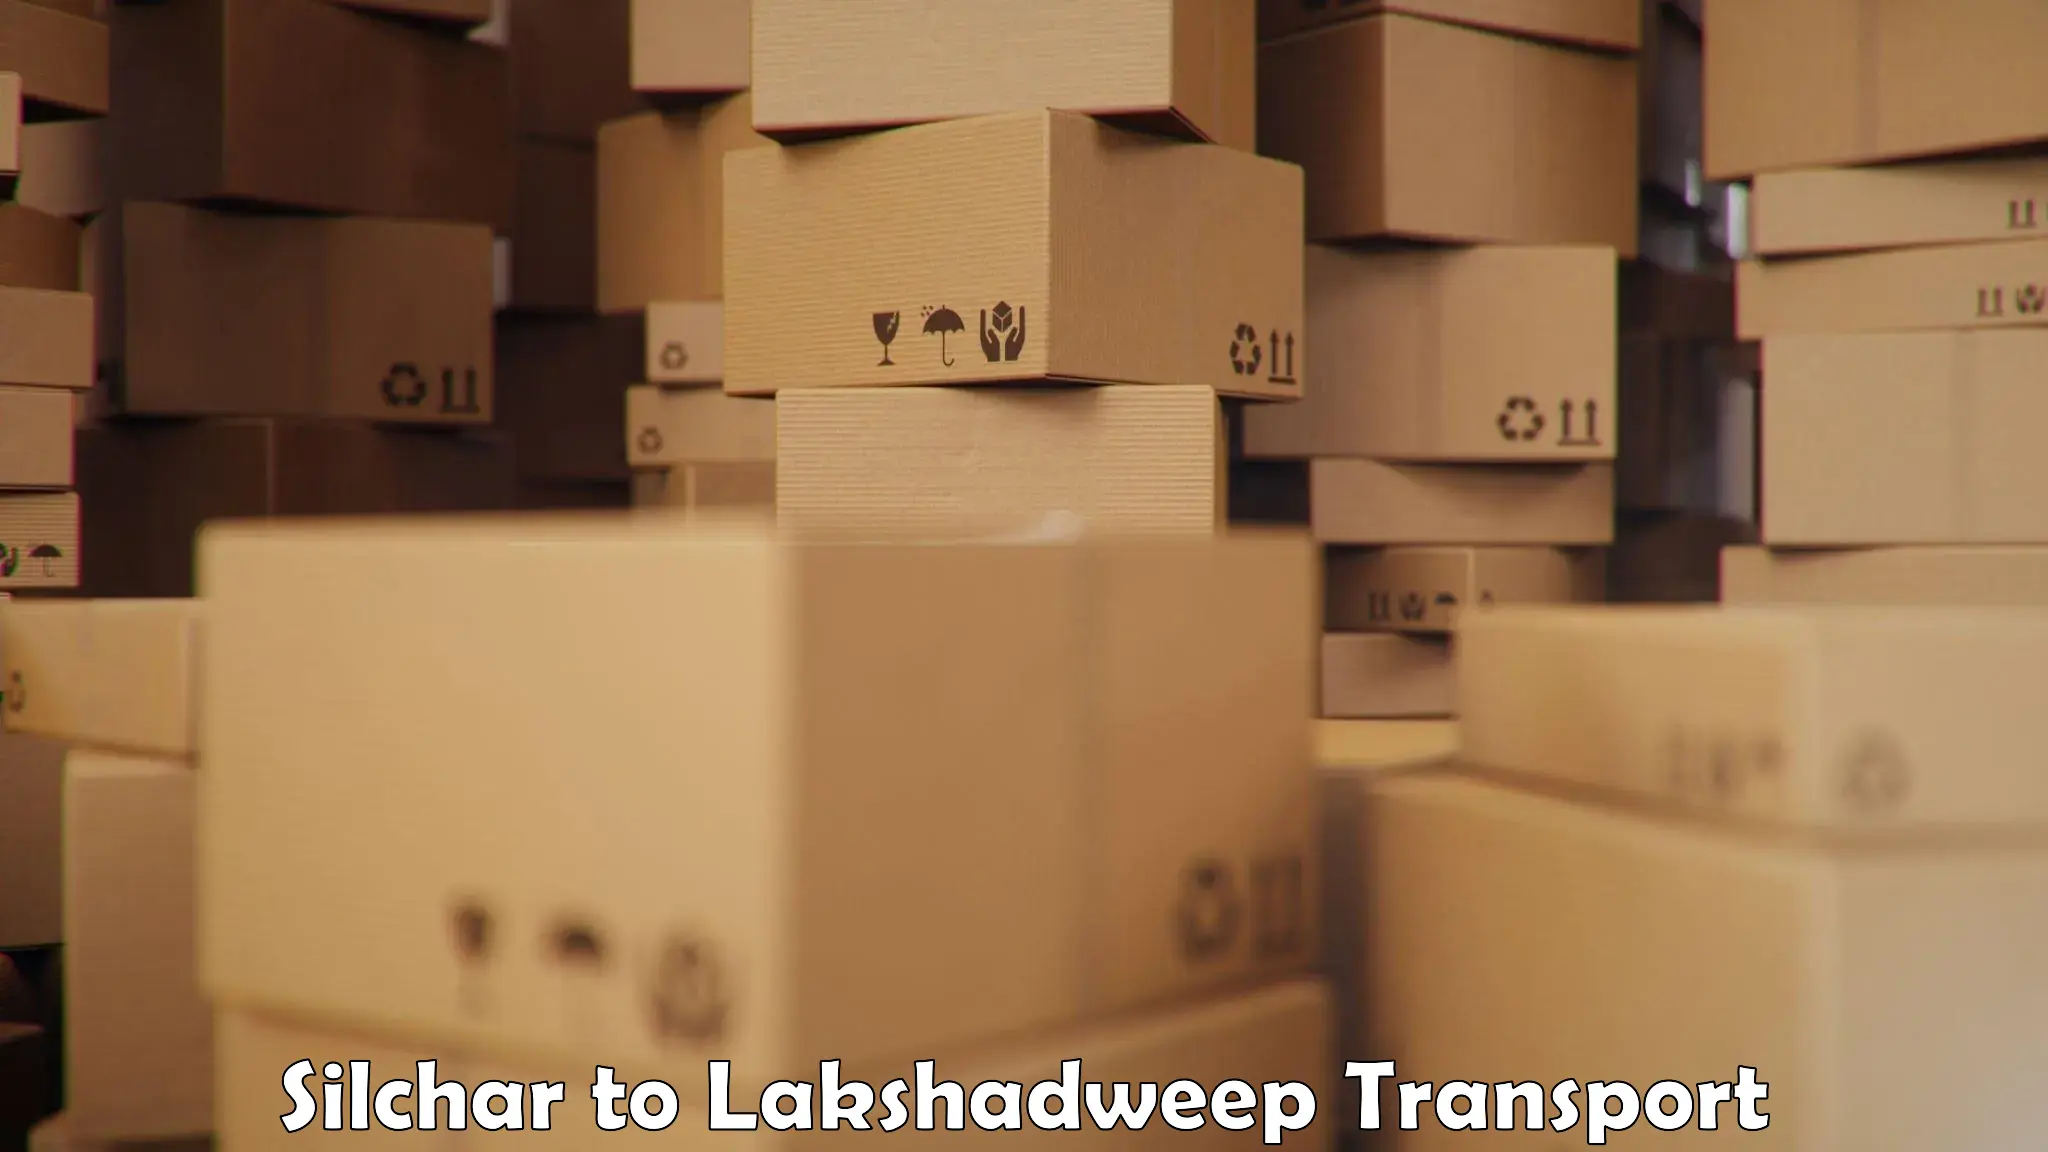 Daily parcel service transport Silchar to Lakshadweep